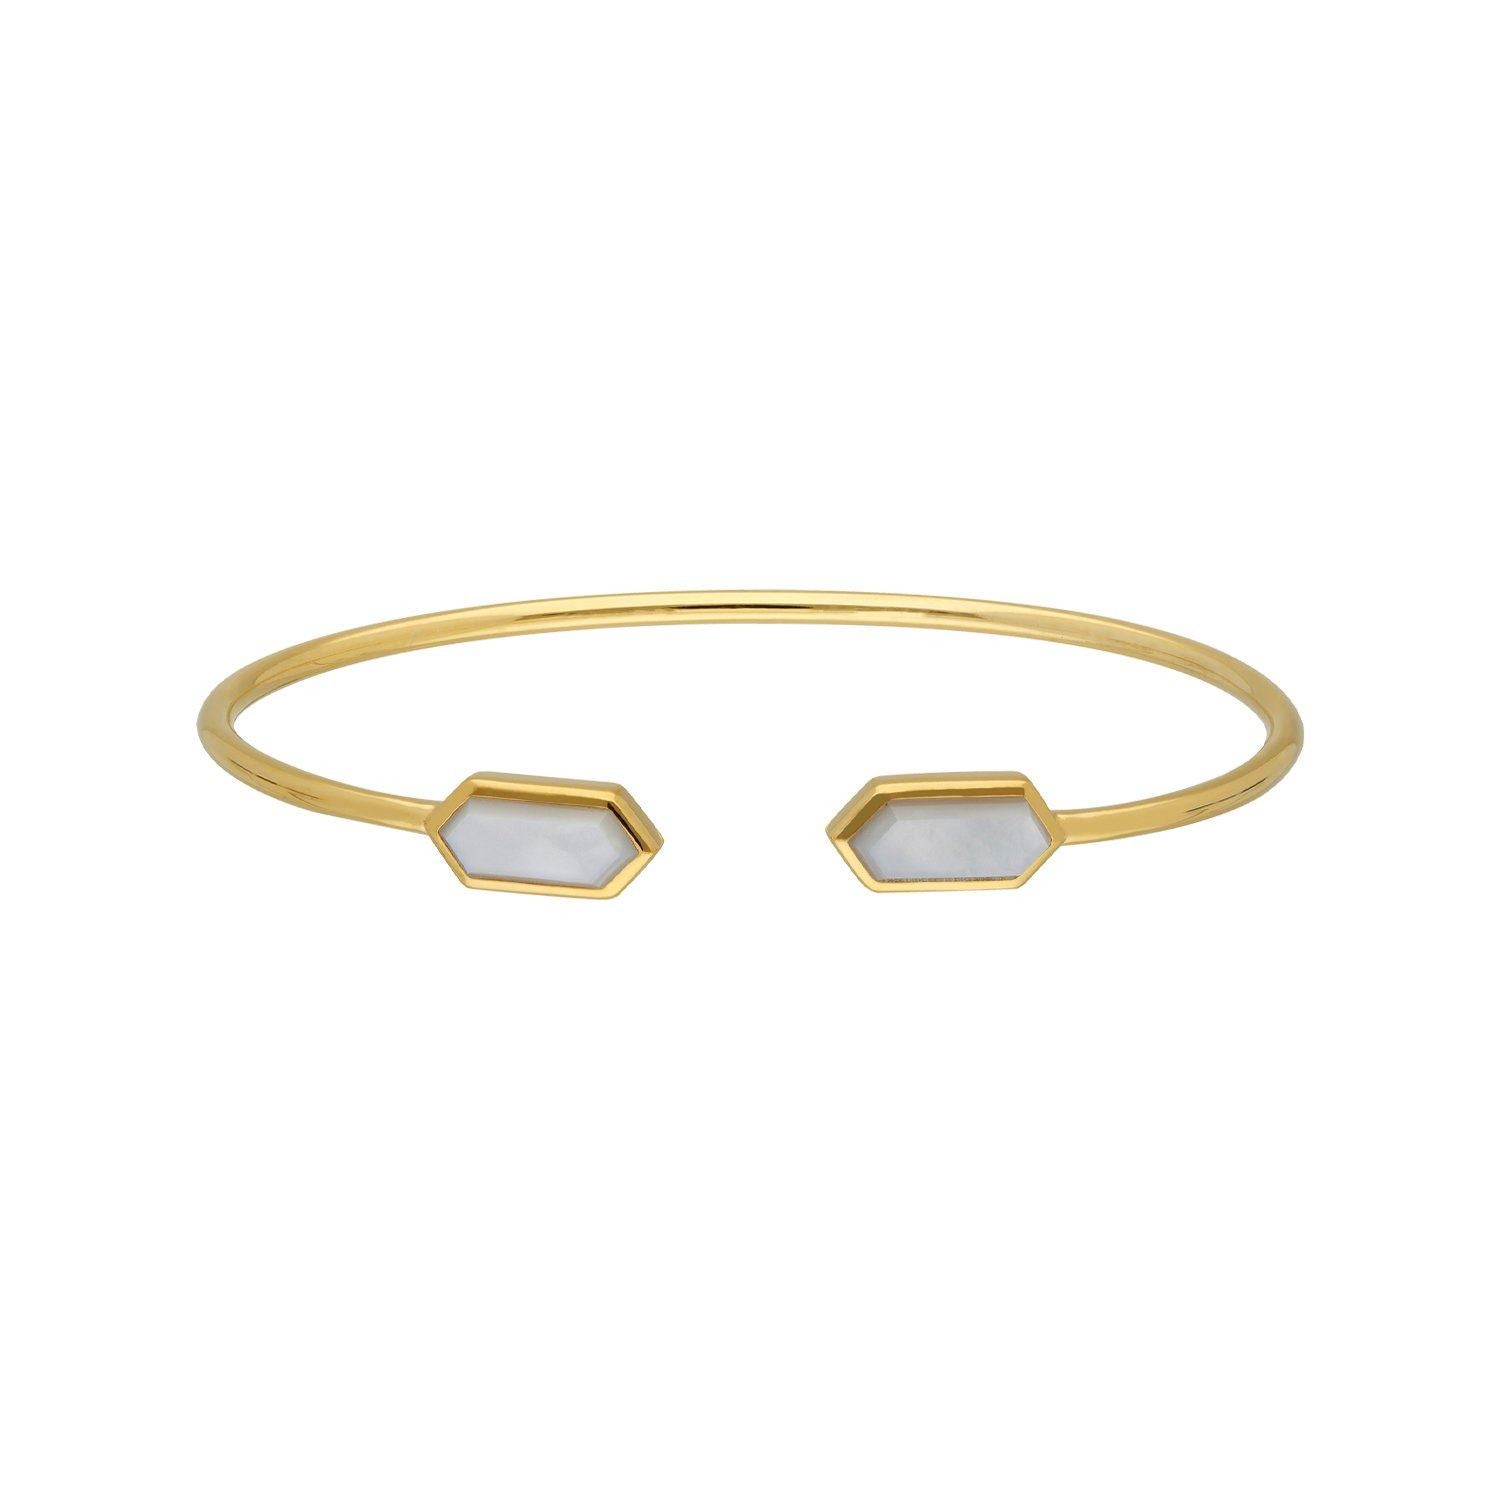 Geometric Mother of Pearl Open Bangle in Gold Plated Sterling Silver